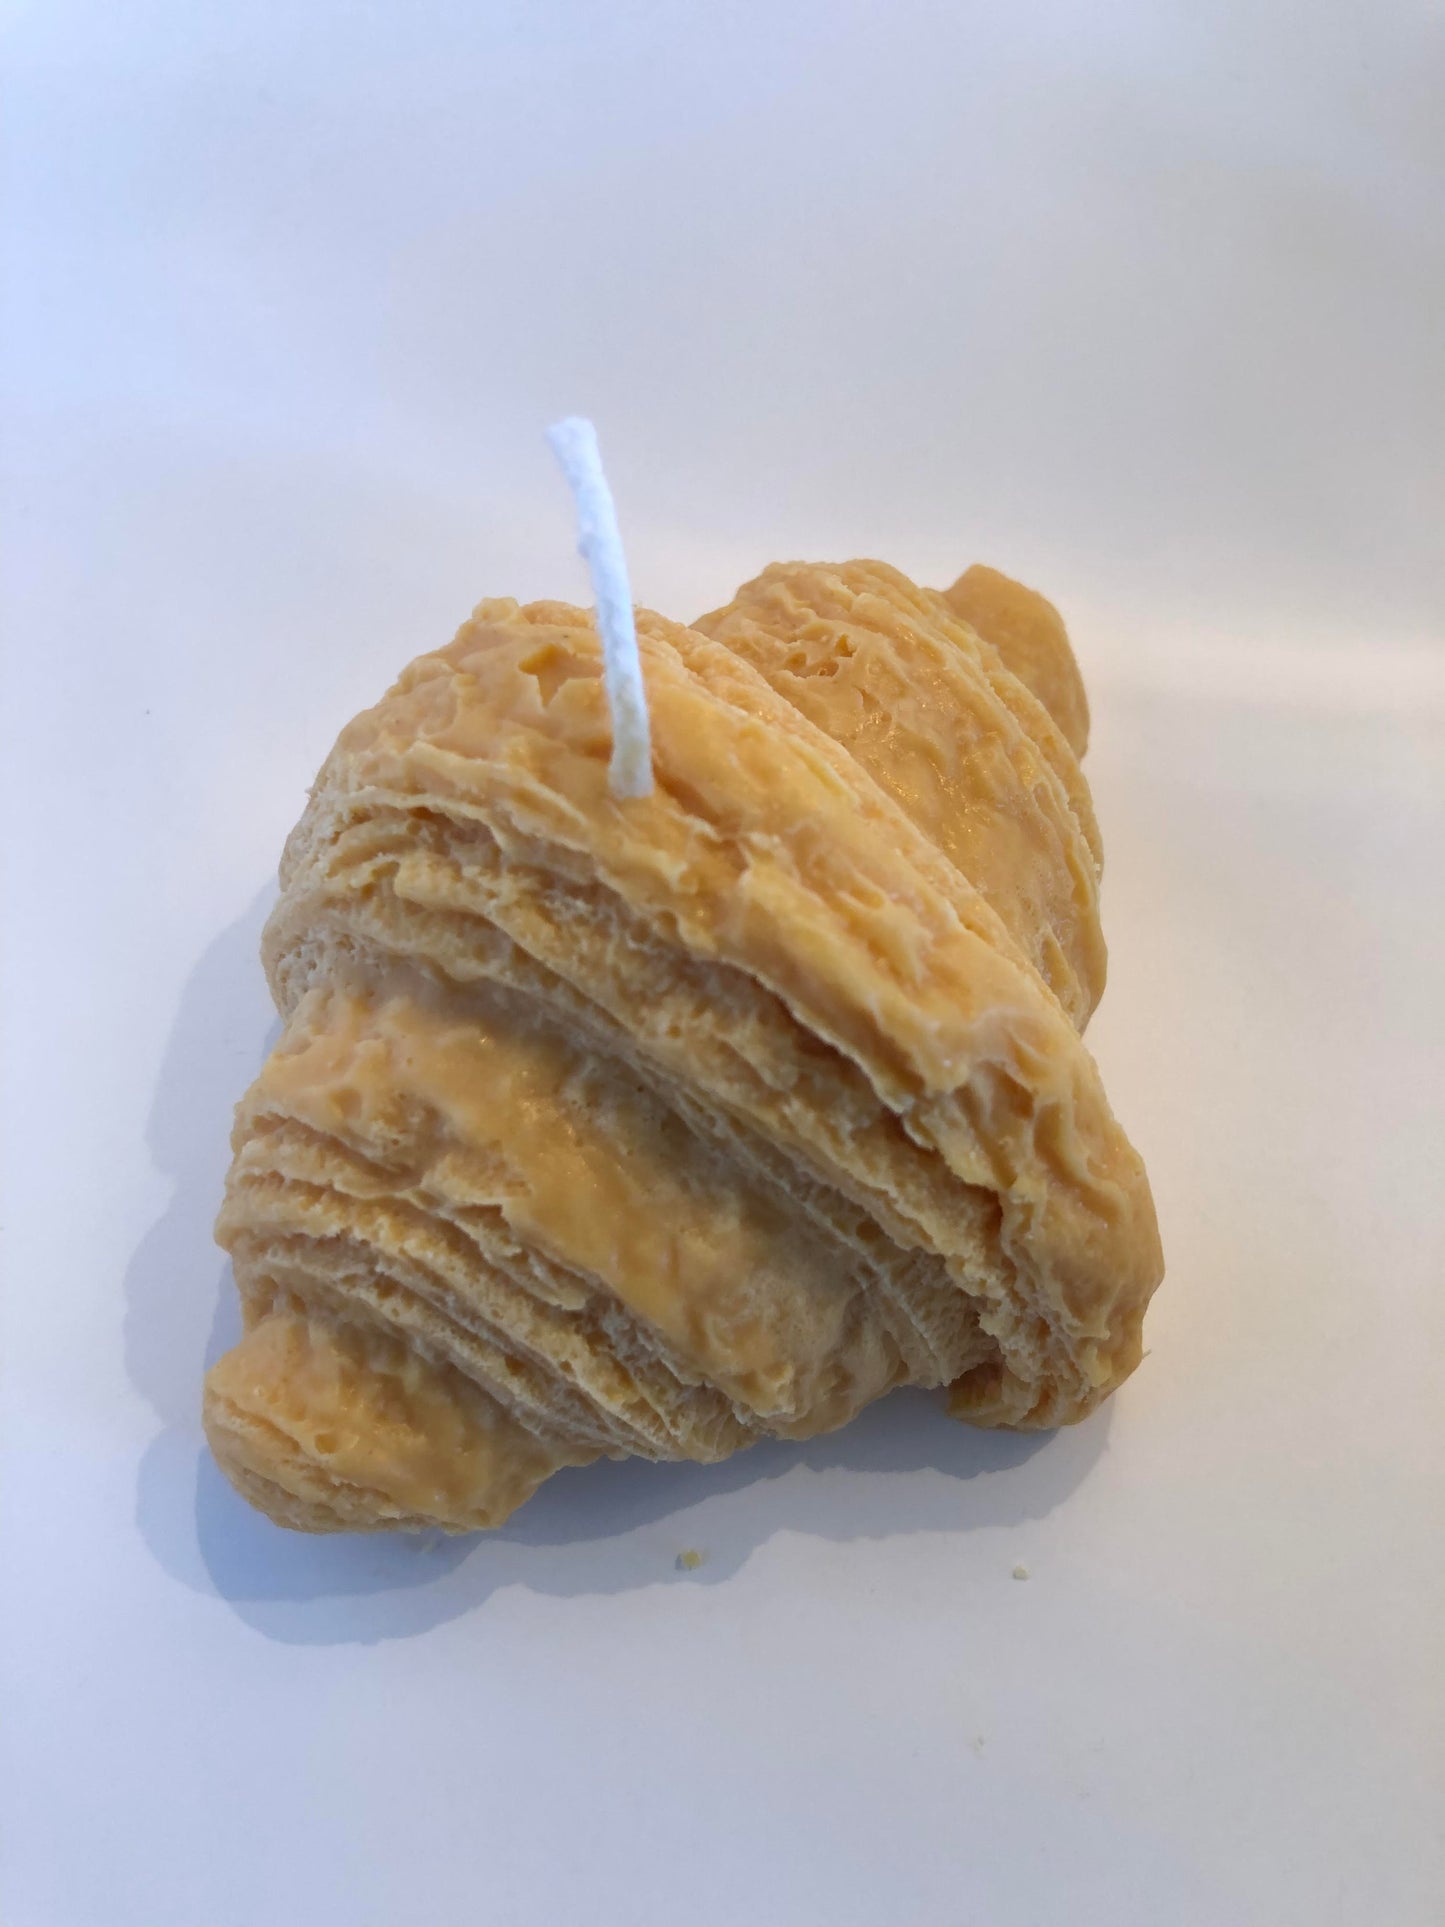 The Croissant Candle